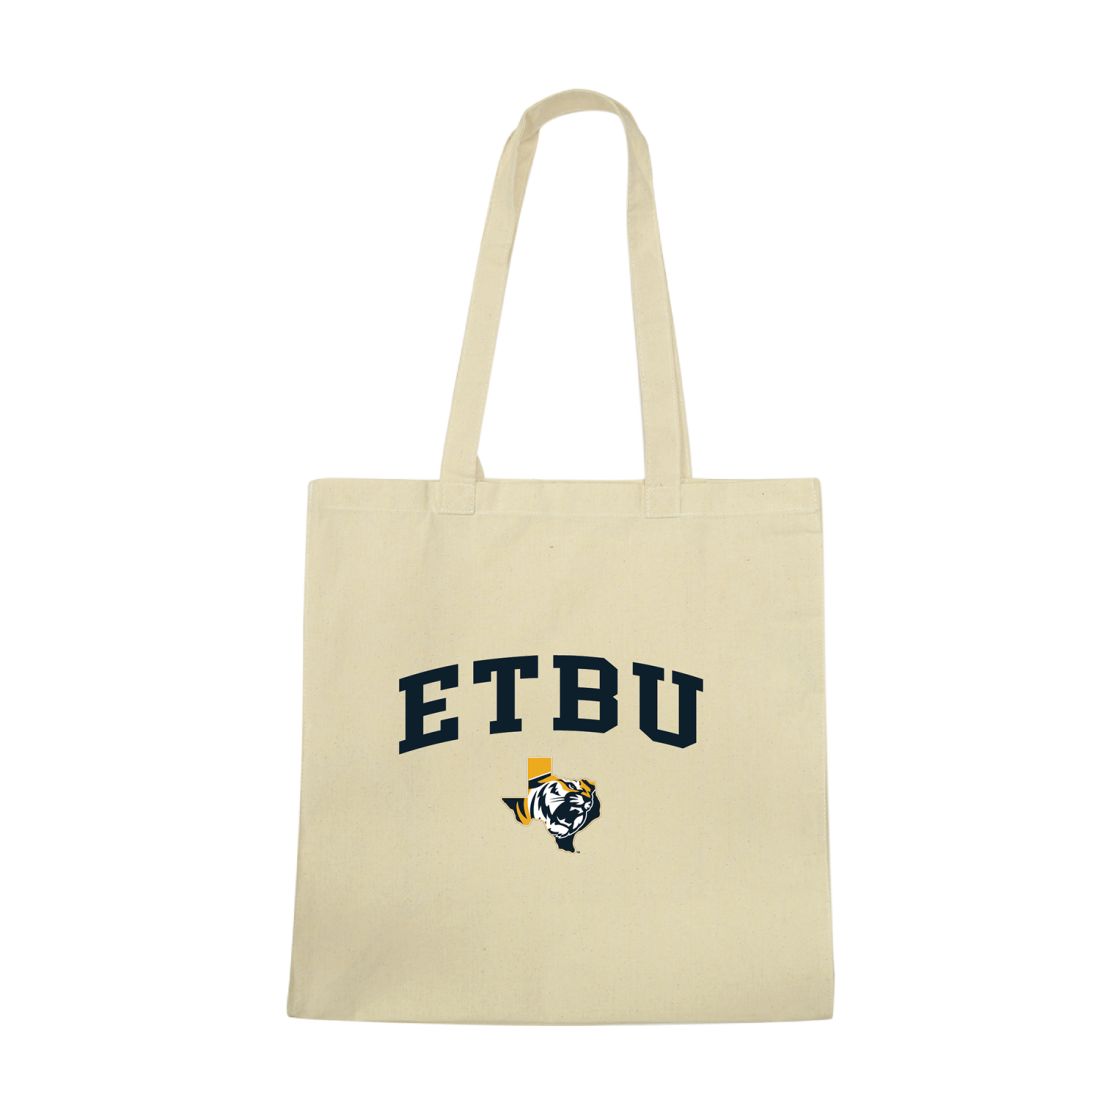 East Texas Baptist University Tigers Institutional Seal Tote Bag